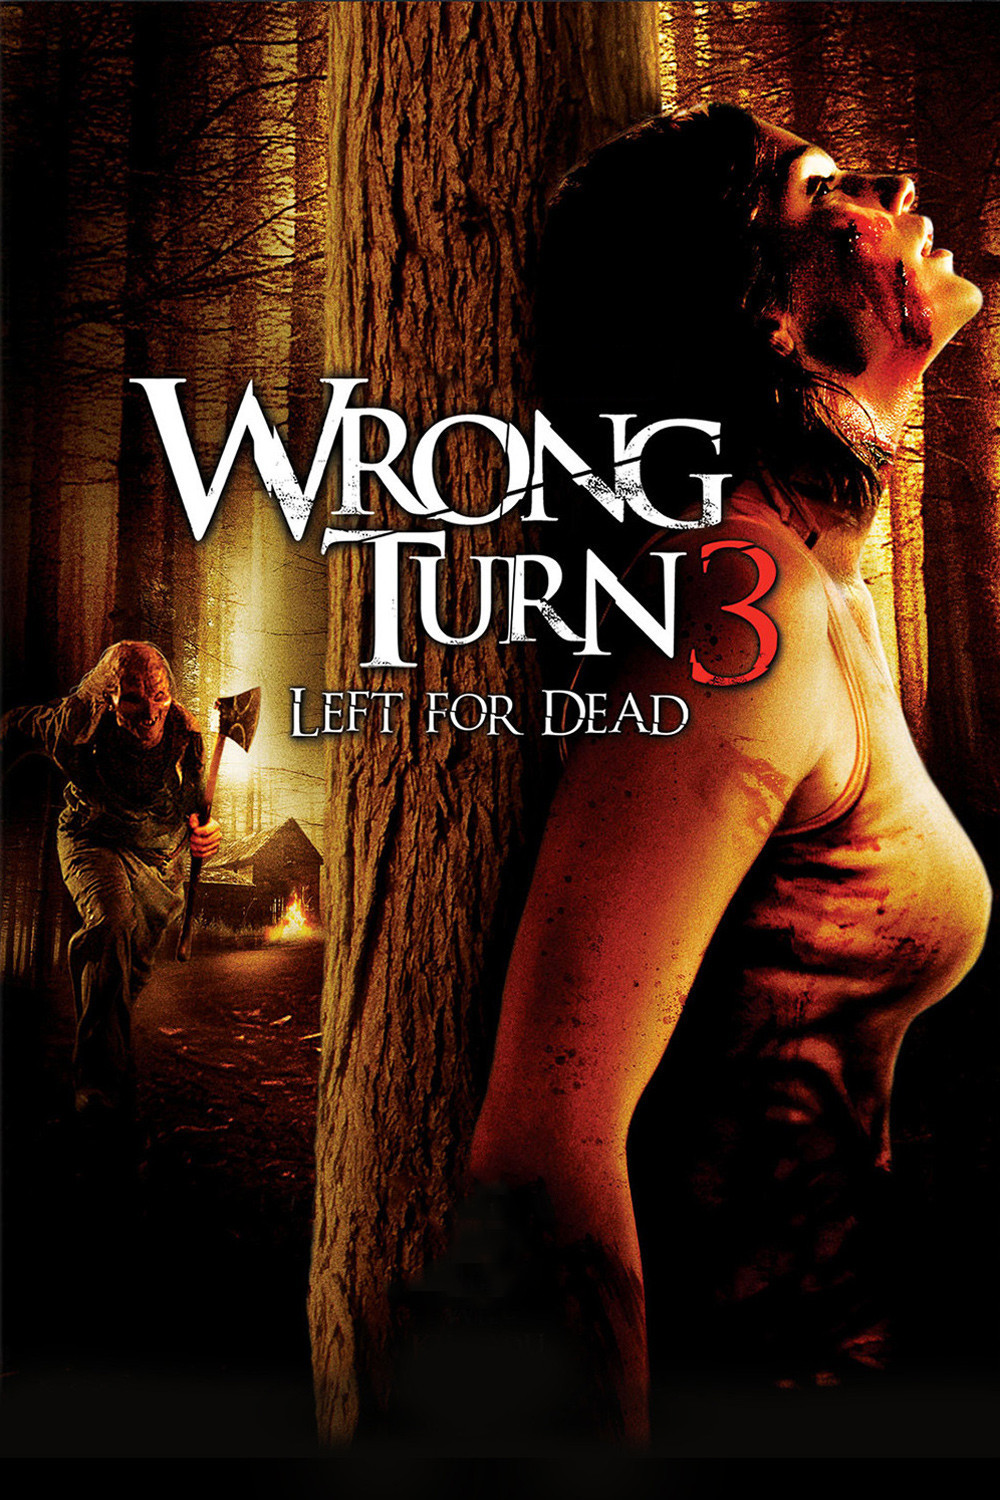 Poster for the movie "Wrong Turn 3: Left for Dead"